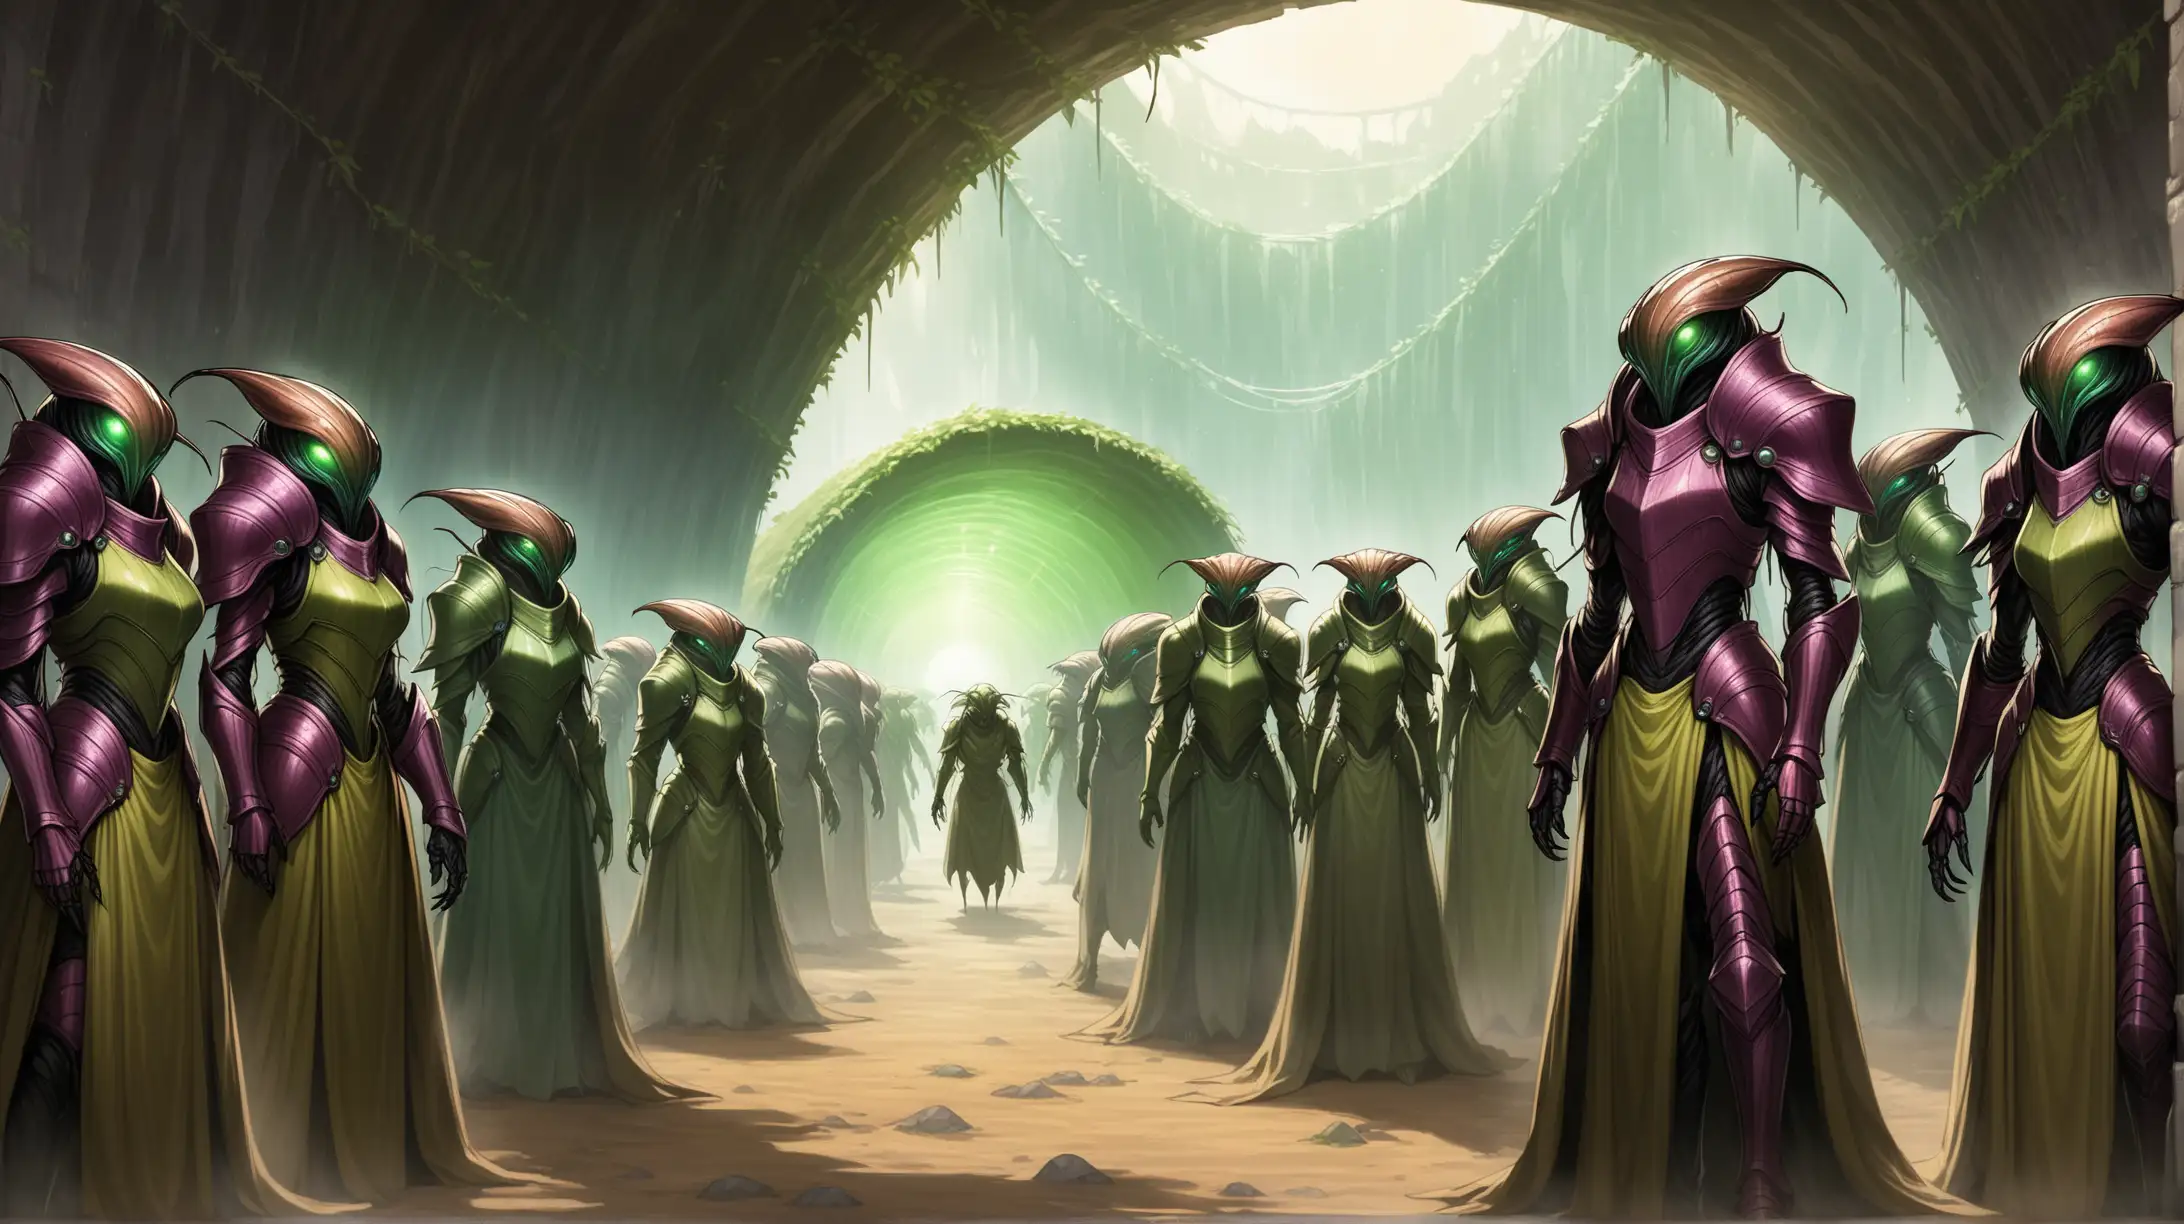 group of insectoid people, many colors, male and female, armors and robes, colony tunnels, Medieval fantasy